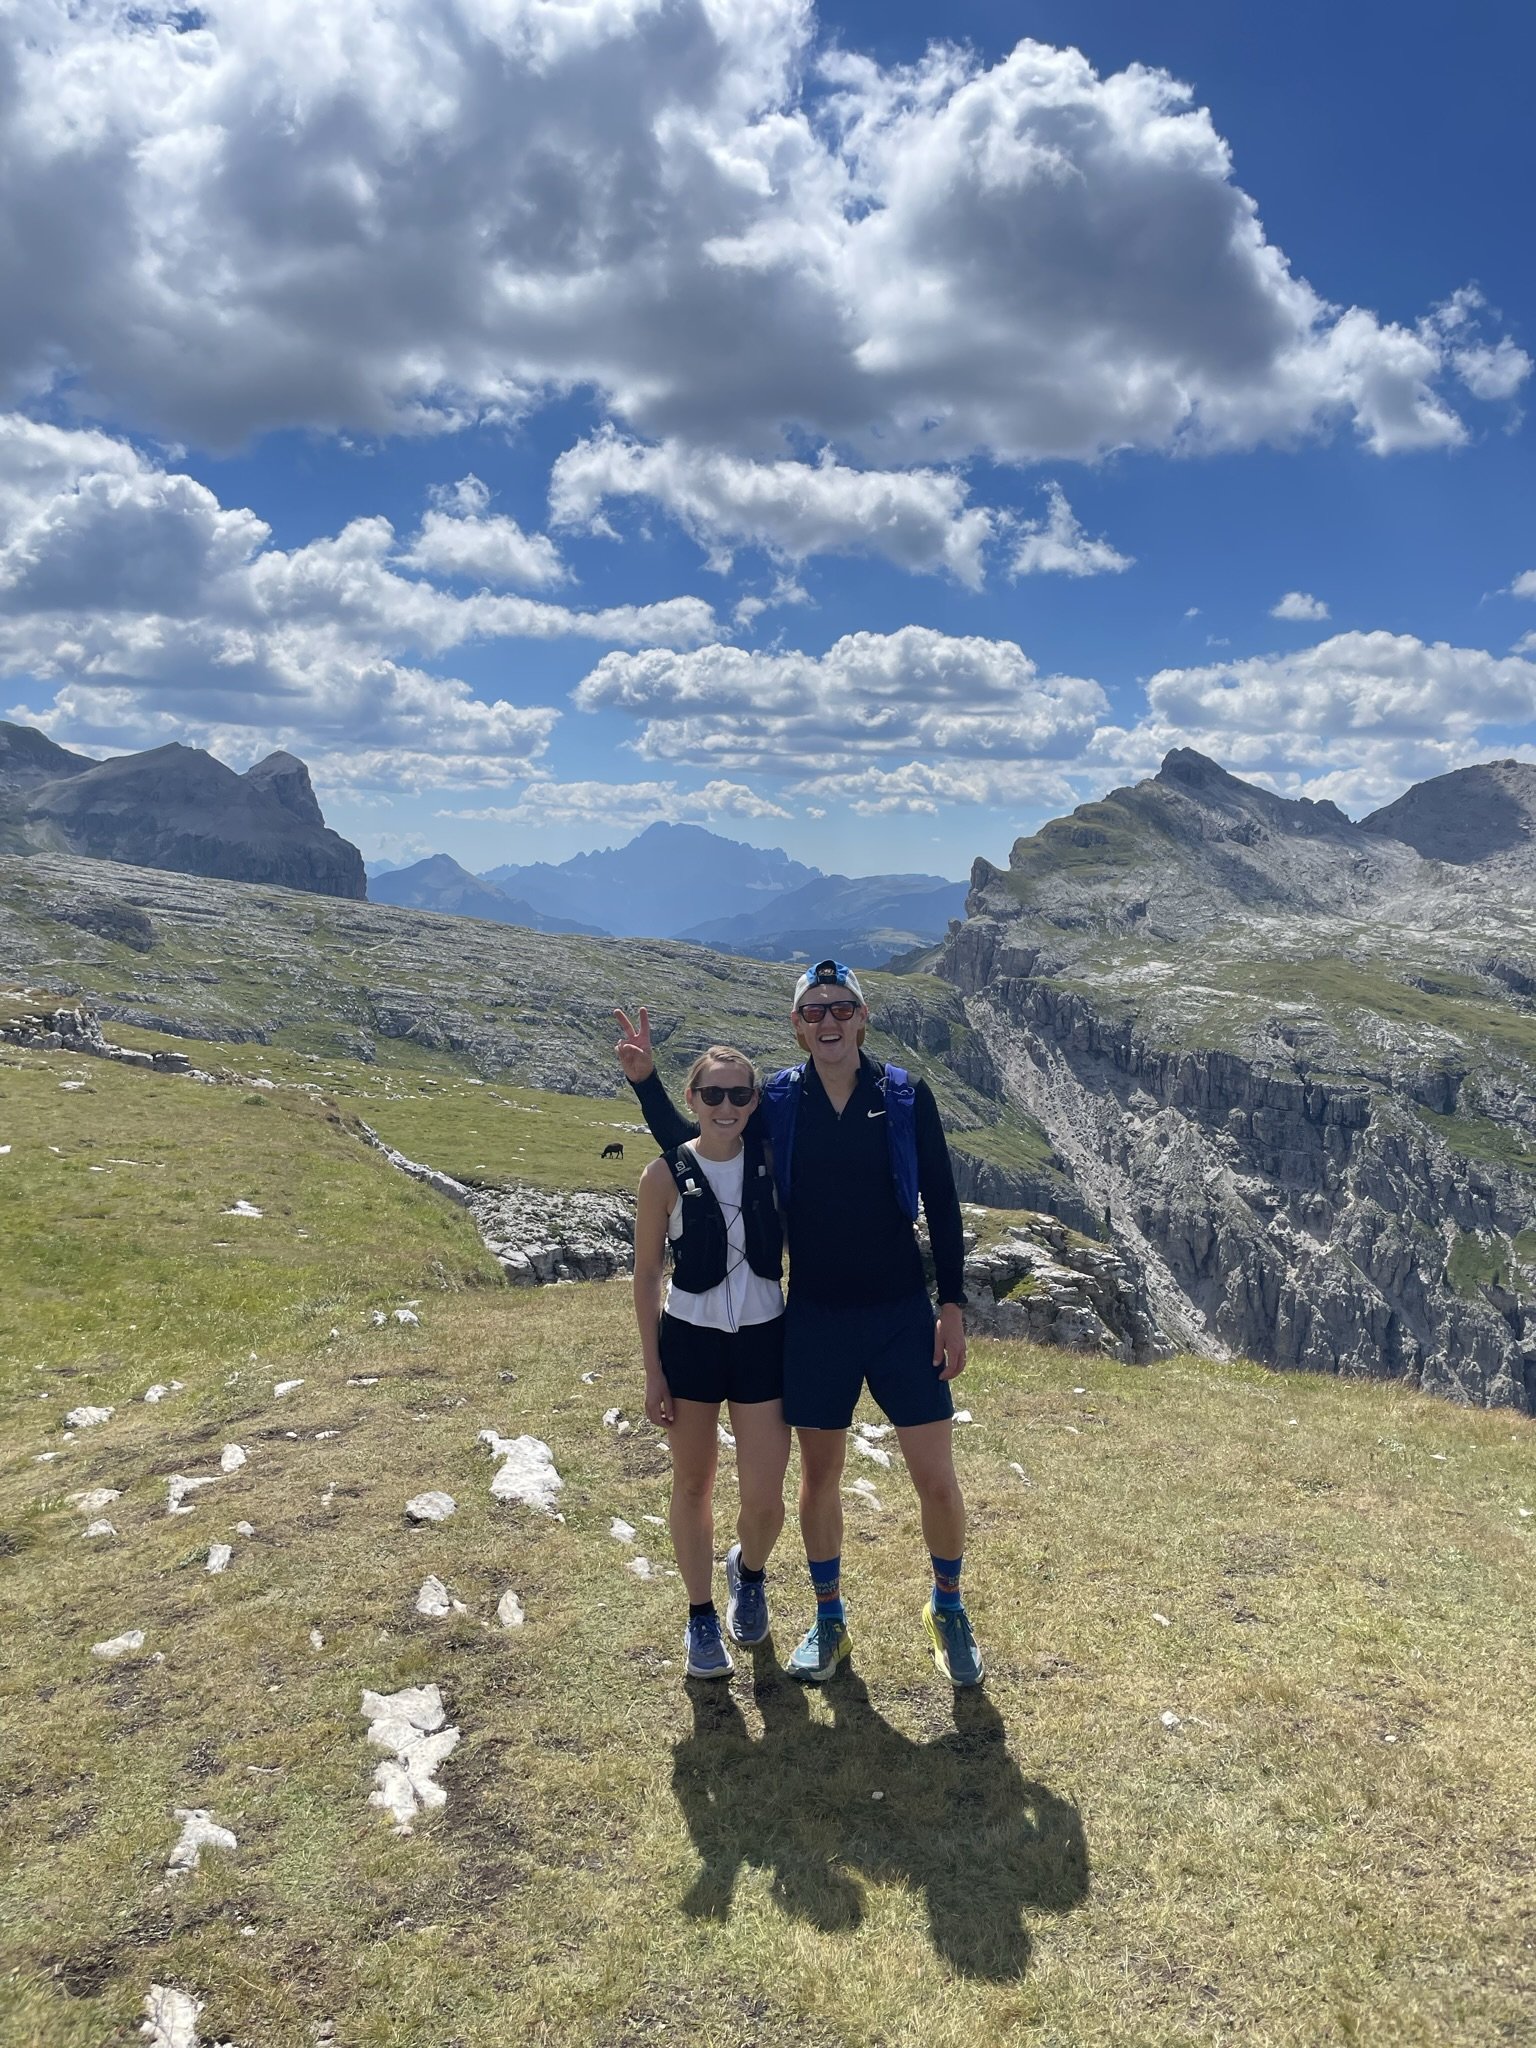   Name:  Maren   Hometown:  Boise, Idaho, USA   Which Runcation did you attend:  Dolomites+Slovenia   What is your profession:  Consultant   How long have you been running?:  Since I was in high school - almost 20 years now.   Did you have experience